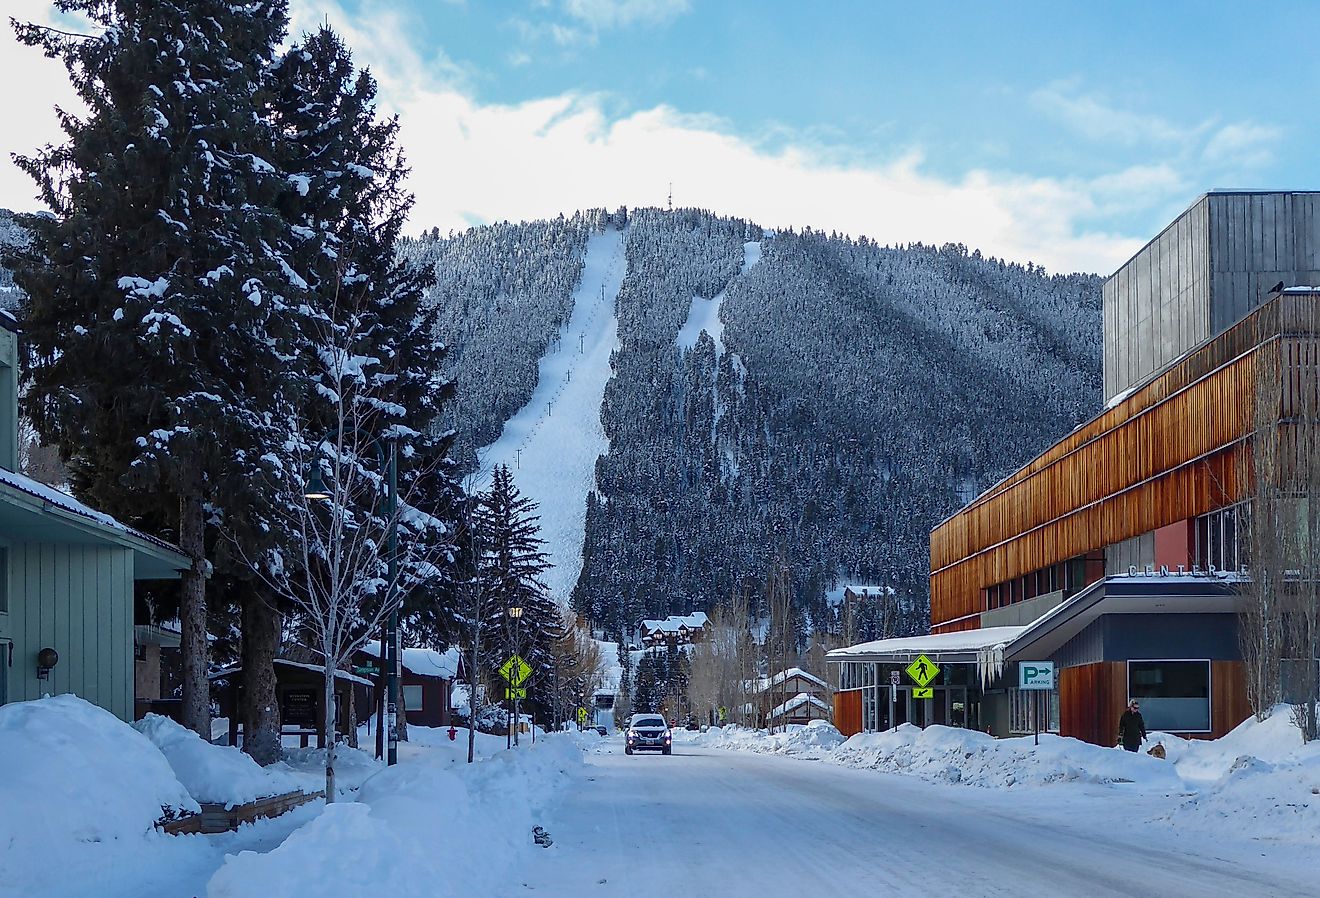 Downtown streets of Jackson, Wyoming, during winter.